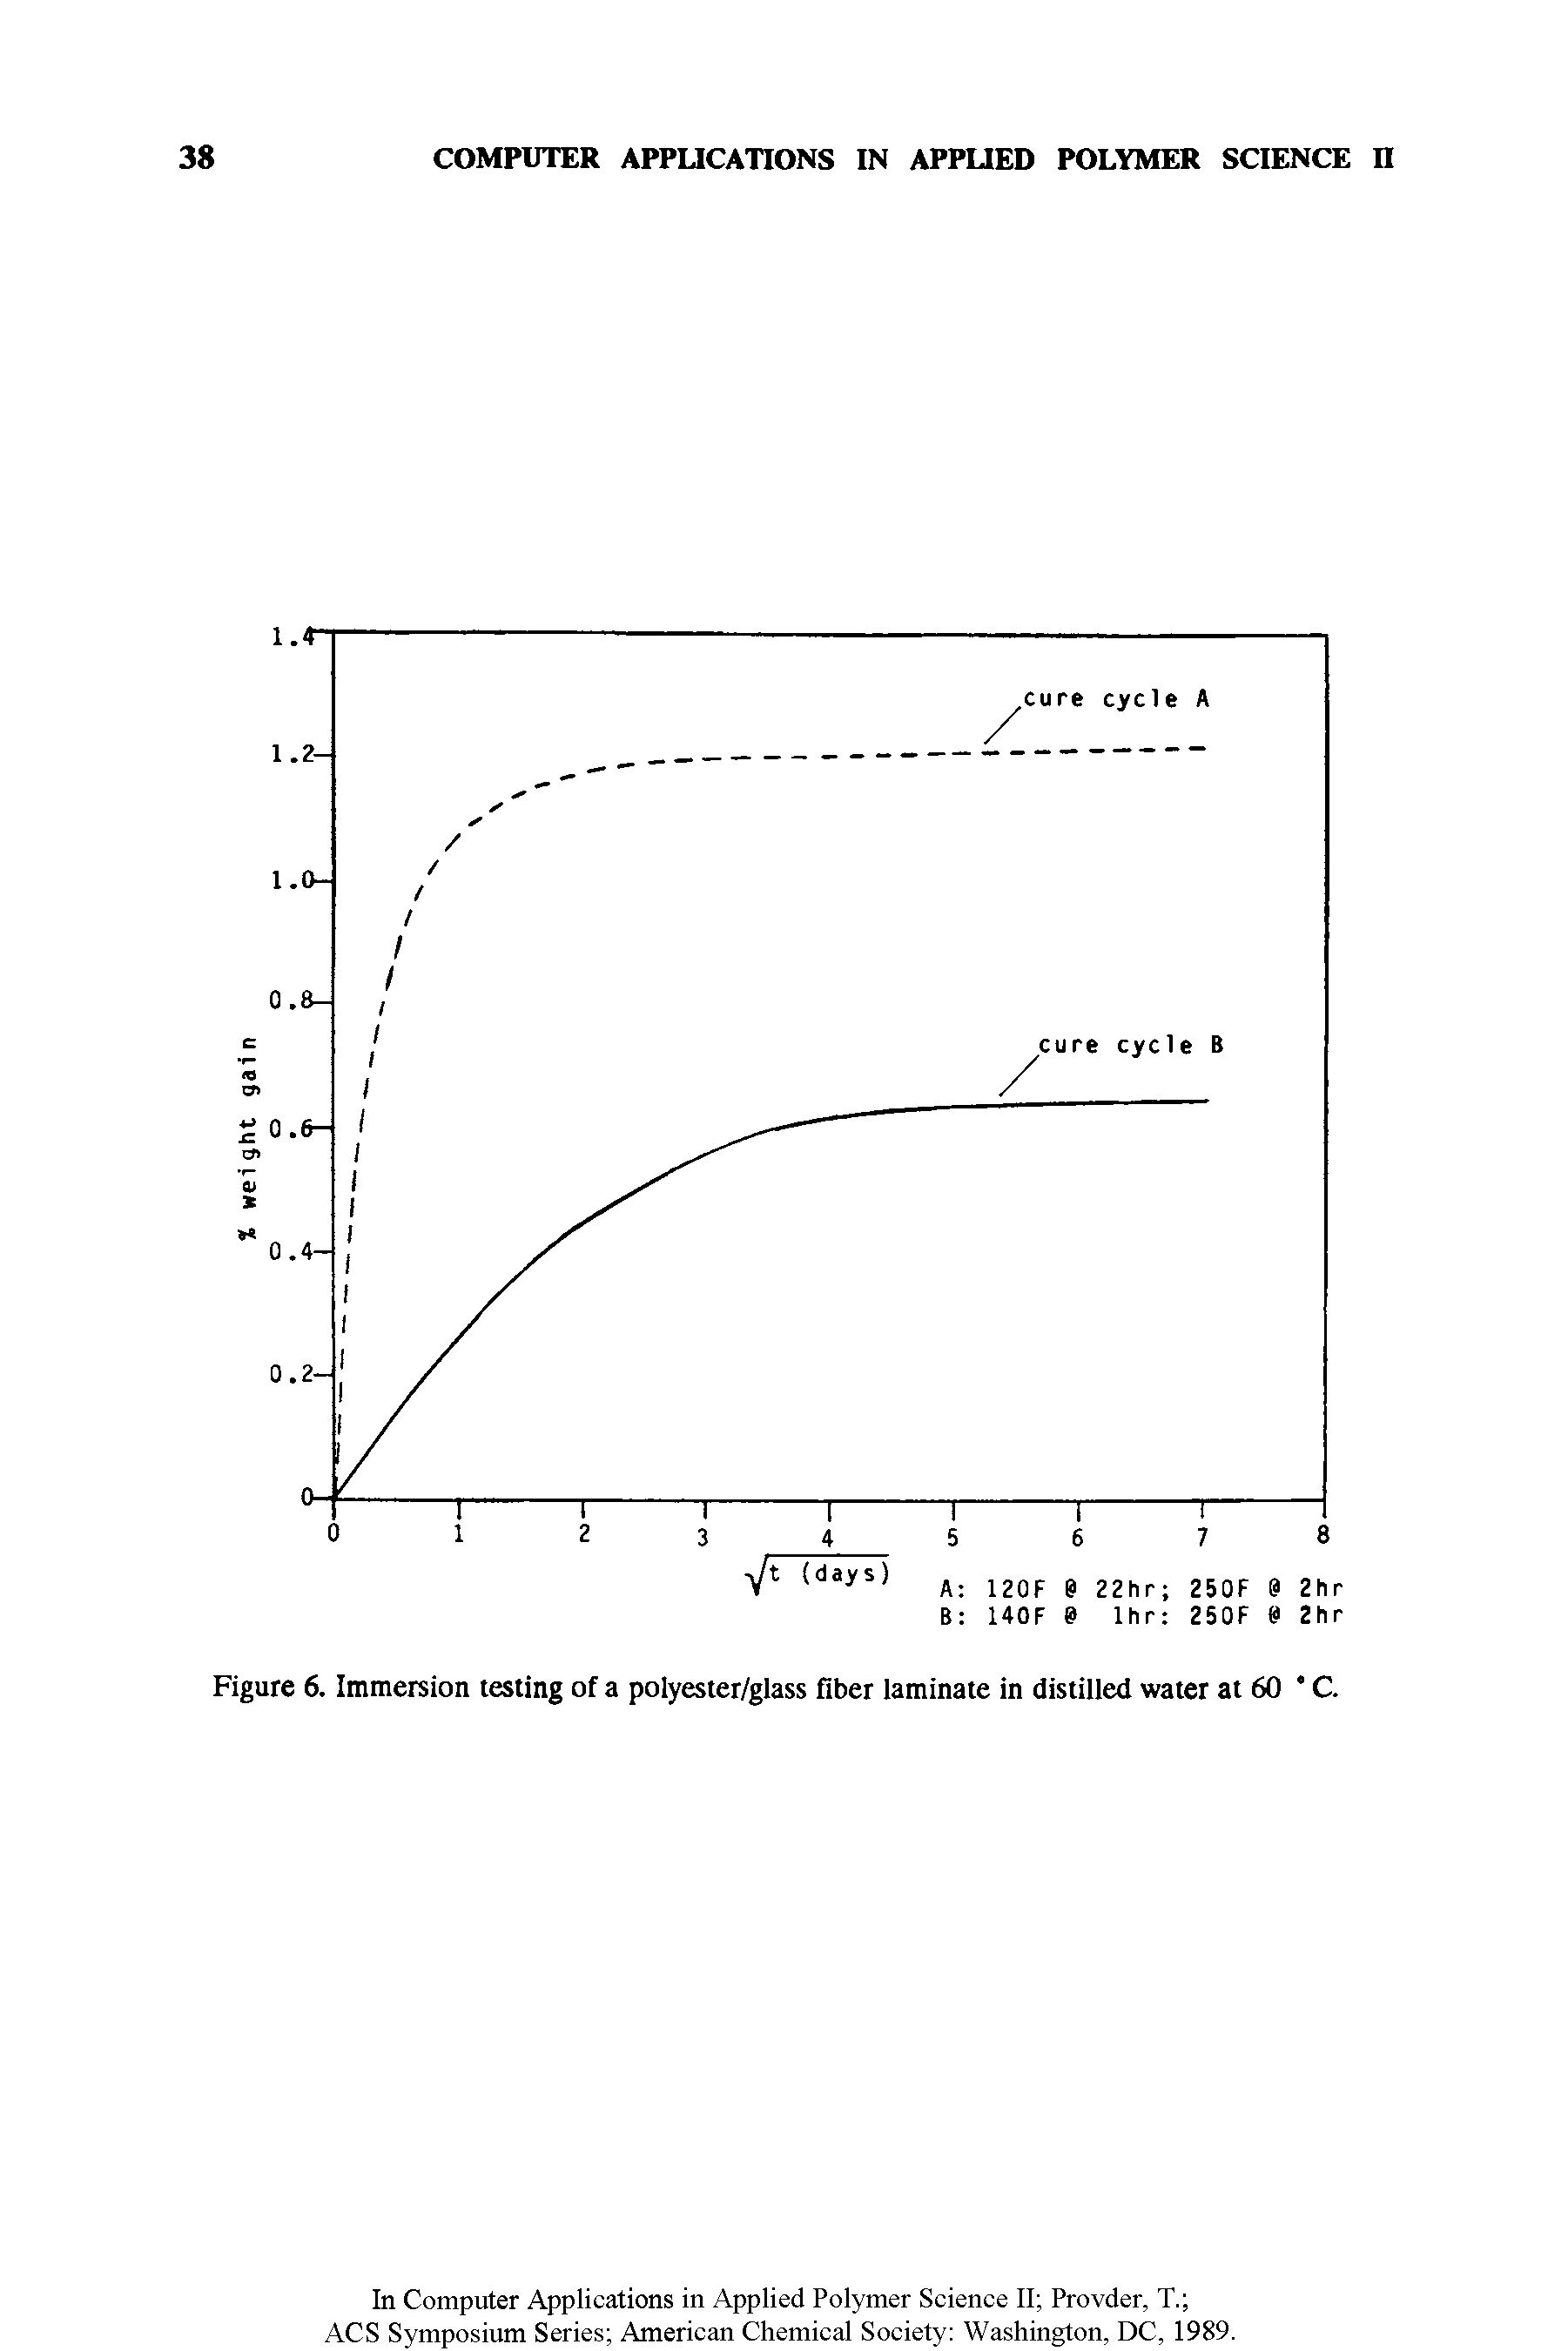 Figure 6. Immersion testing of a polyester/glass fiber laminate in distilled water at 60 C.